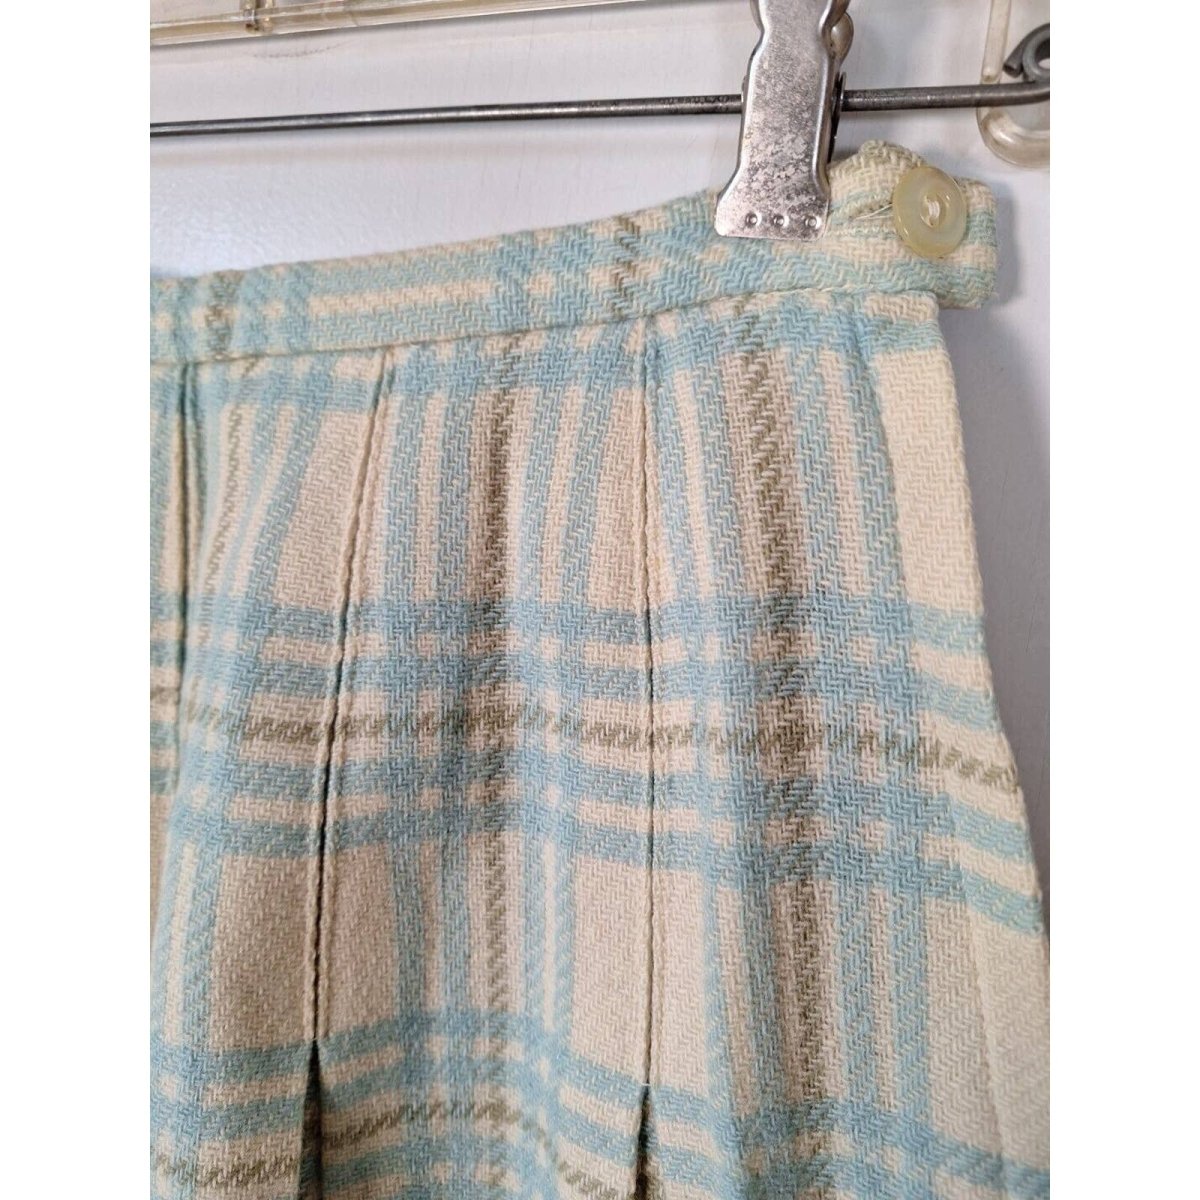 Vintage 1960s Wool Plaid Knee Length Pleated Skirt Women's Size XS Waist 25" - themallvintage The Mall Vintage